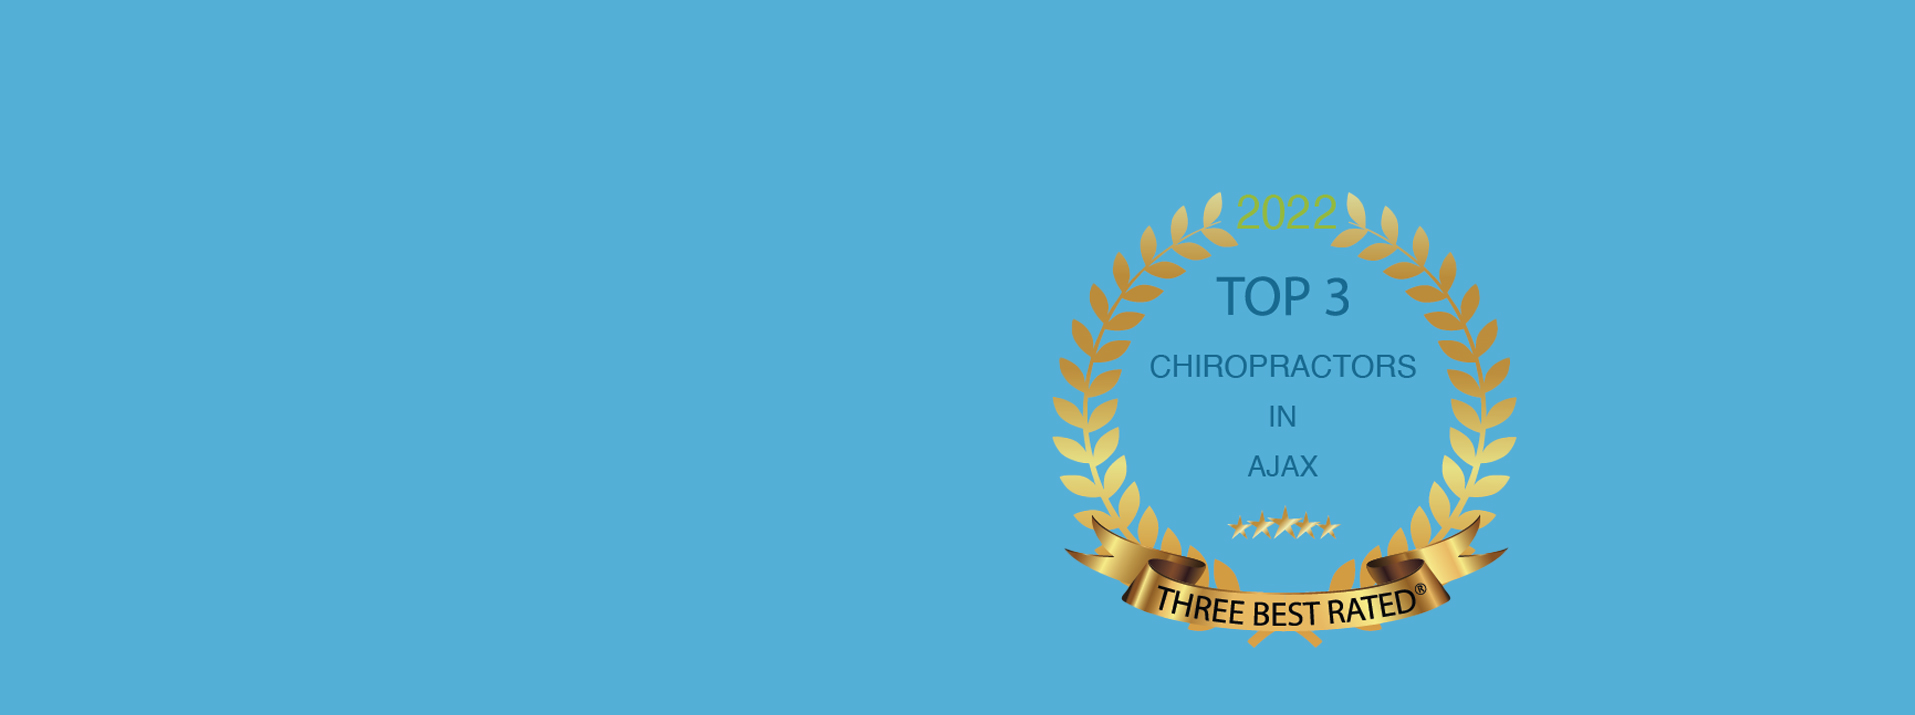 Awarded ThreeBest Rated® Chiropractors in Ajax
5 years in a row